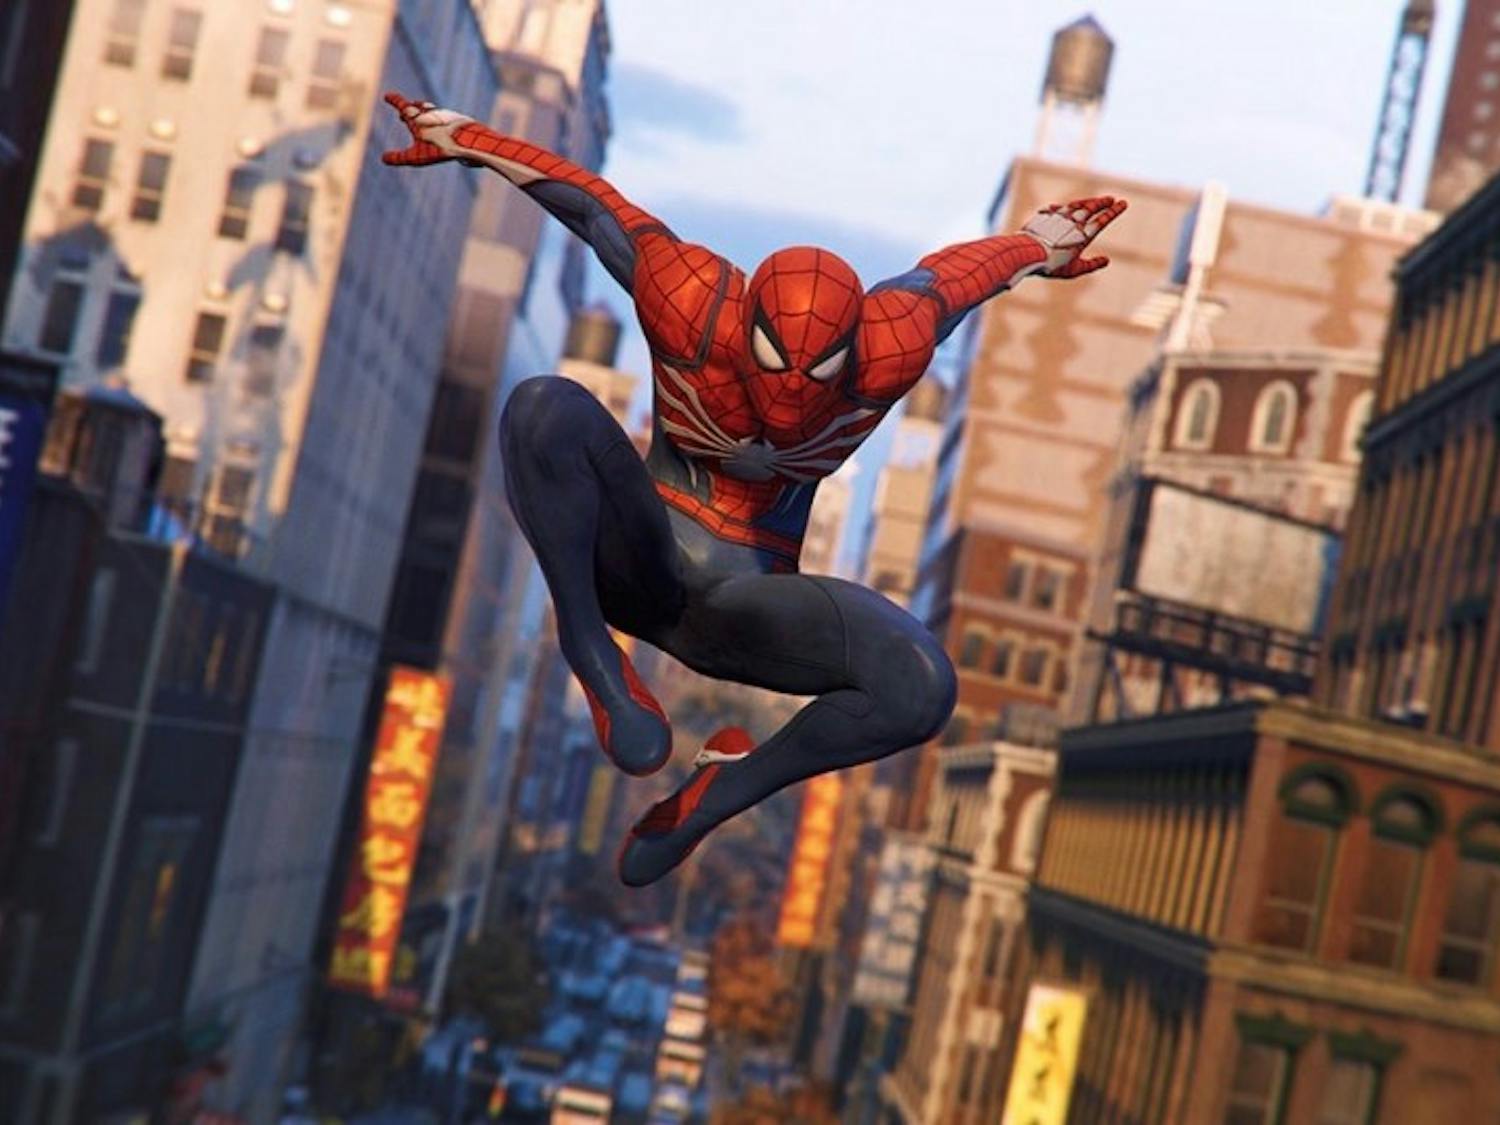 Despite its many influences, Insomniac Games' take on the web-slinger is an innovative new entry.